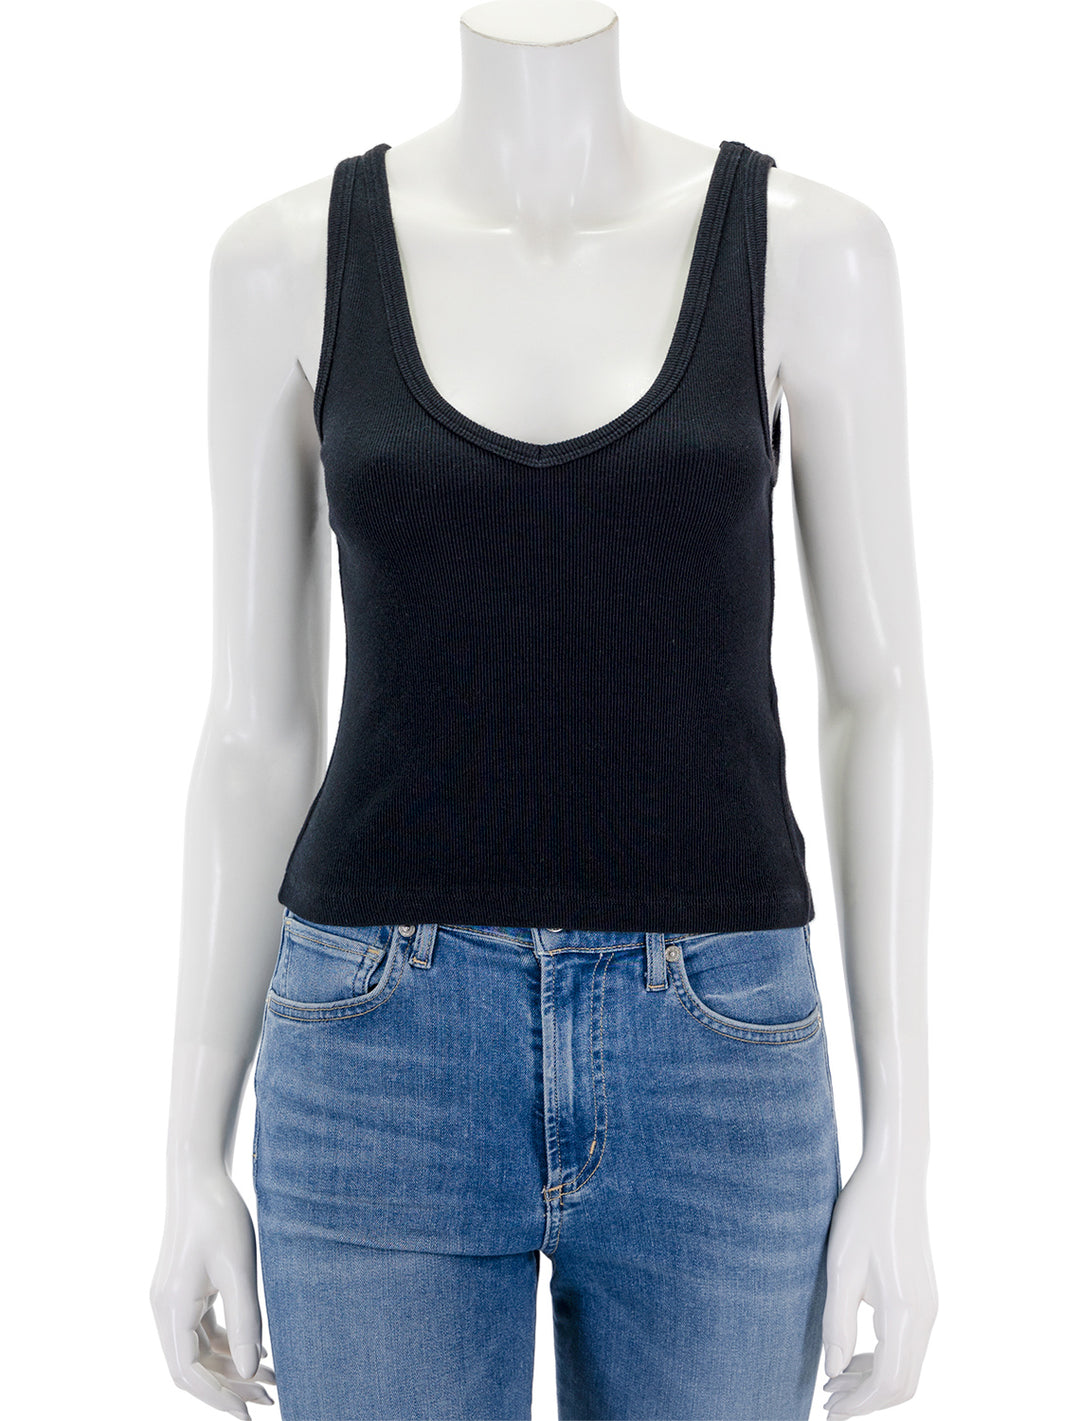 Front view of Perfectwhitetee's maria tank in black.